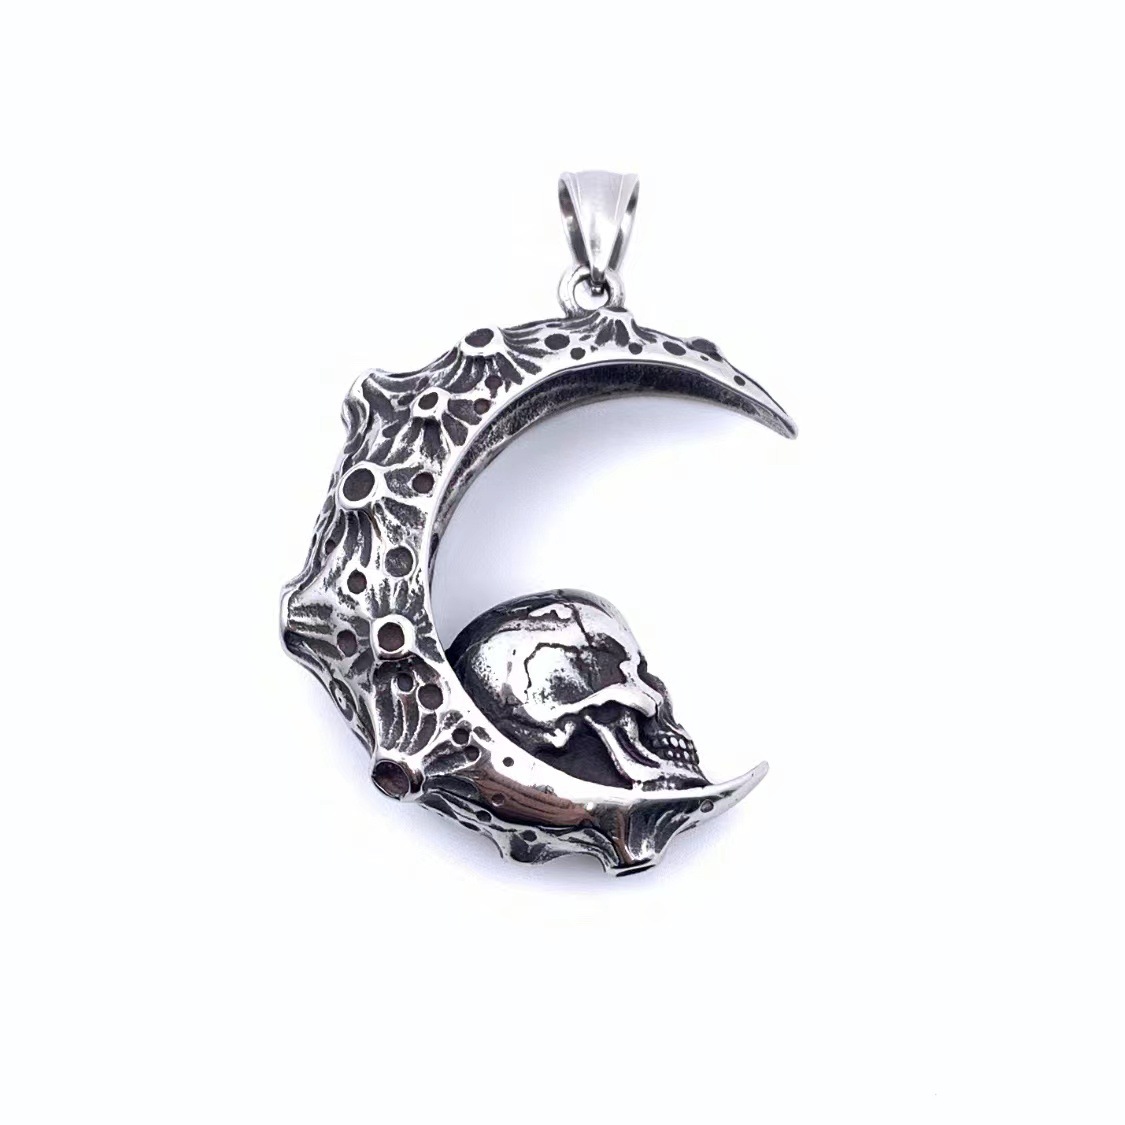 Single pendant ( without chain )